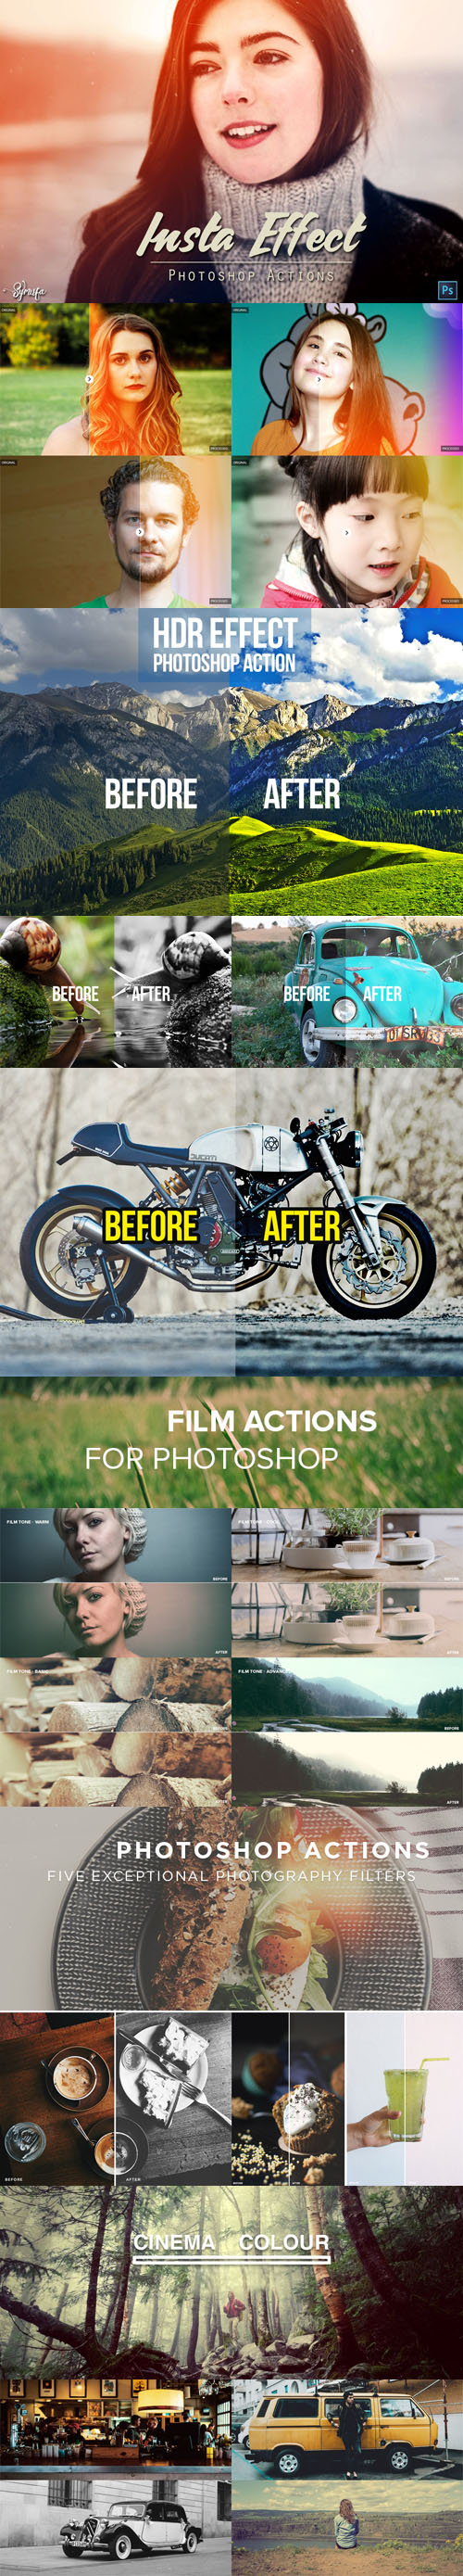 Collection of Film, Cinema & Photo Color Actions for Photoshop